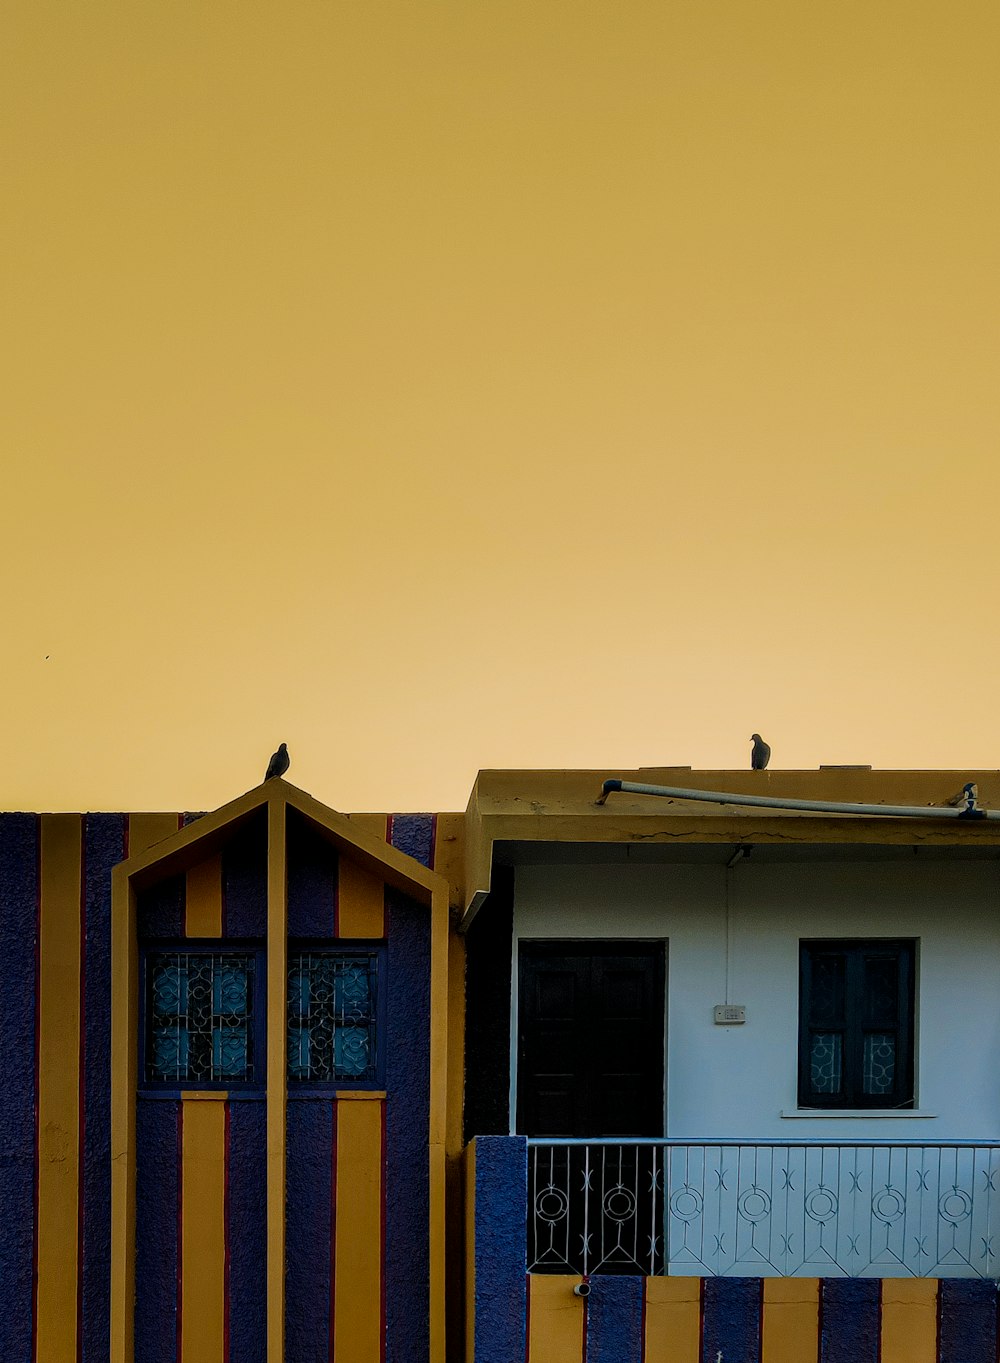 a yellow and blue building with a bird sitting on top of it